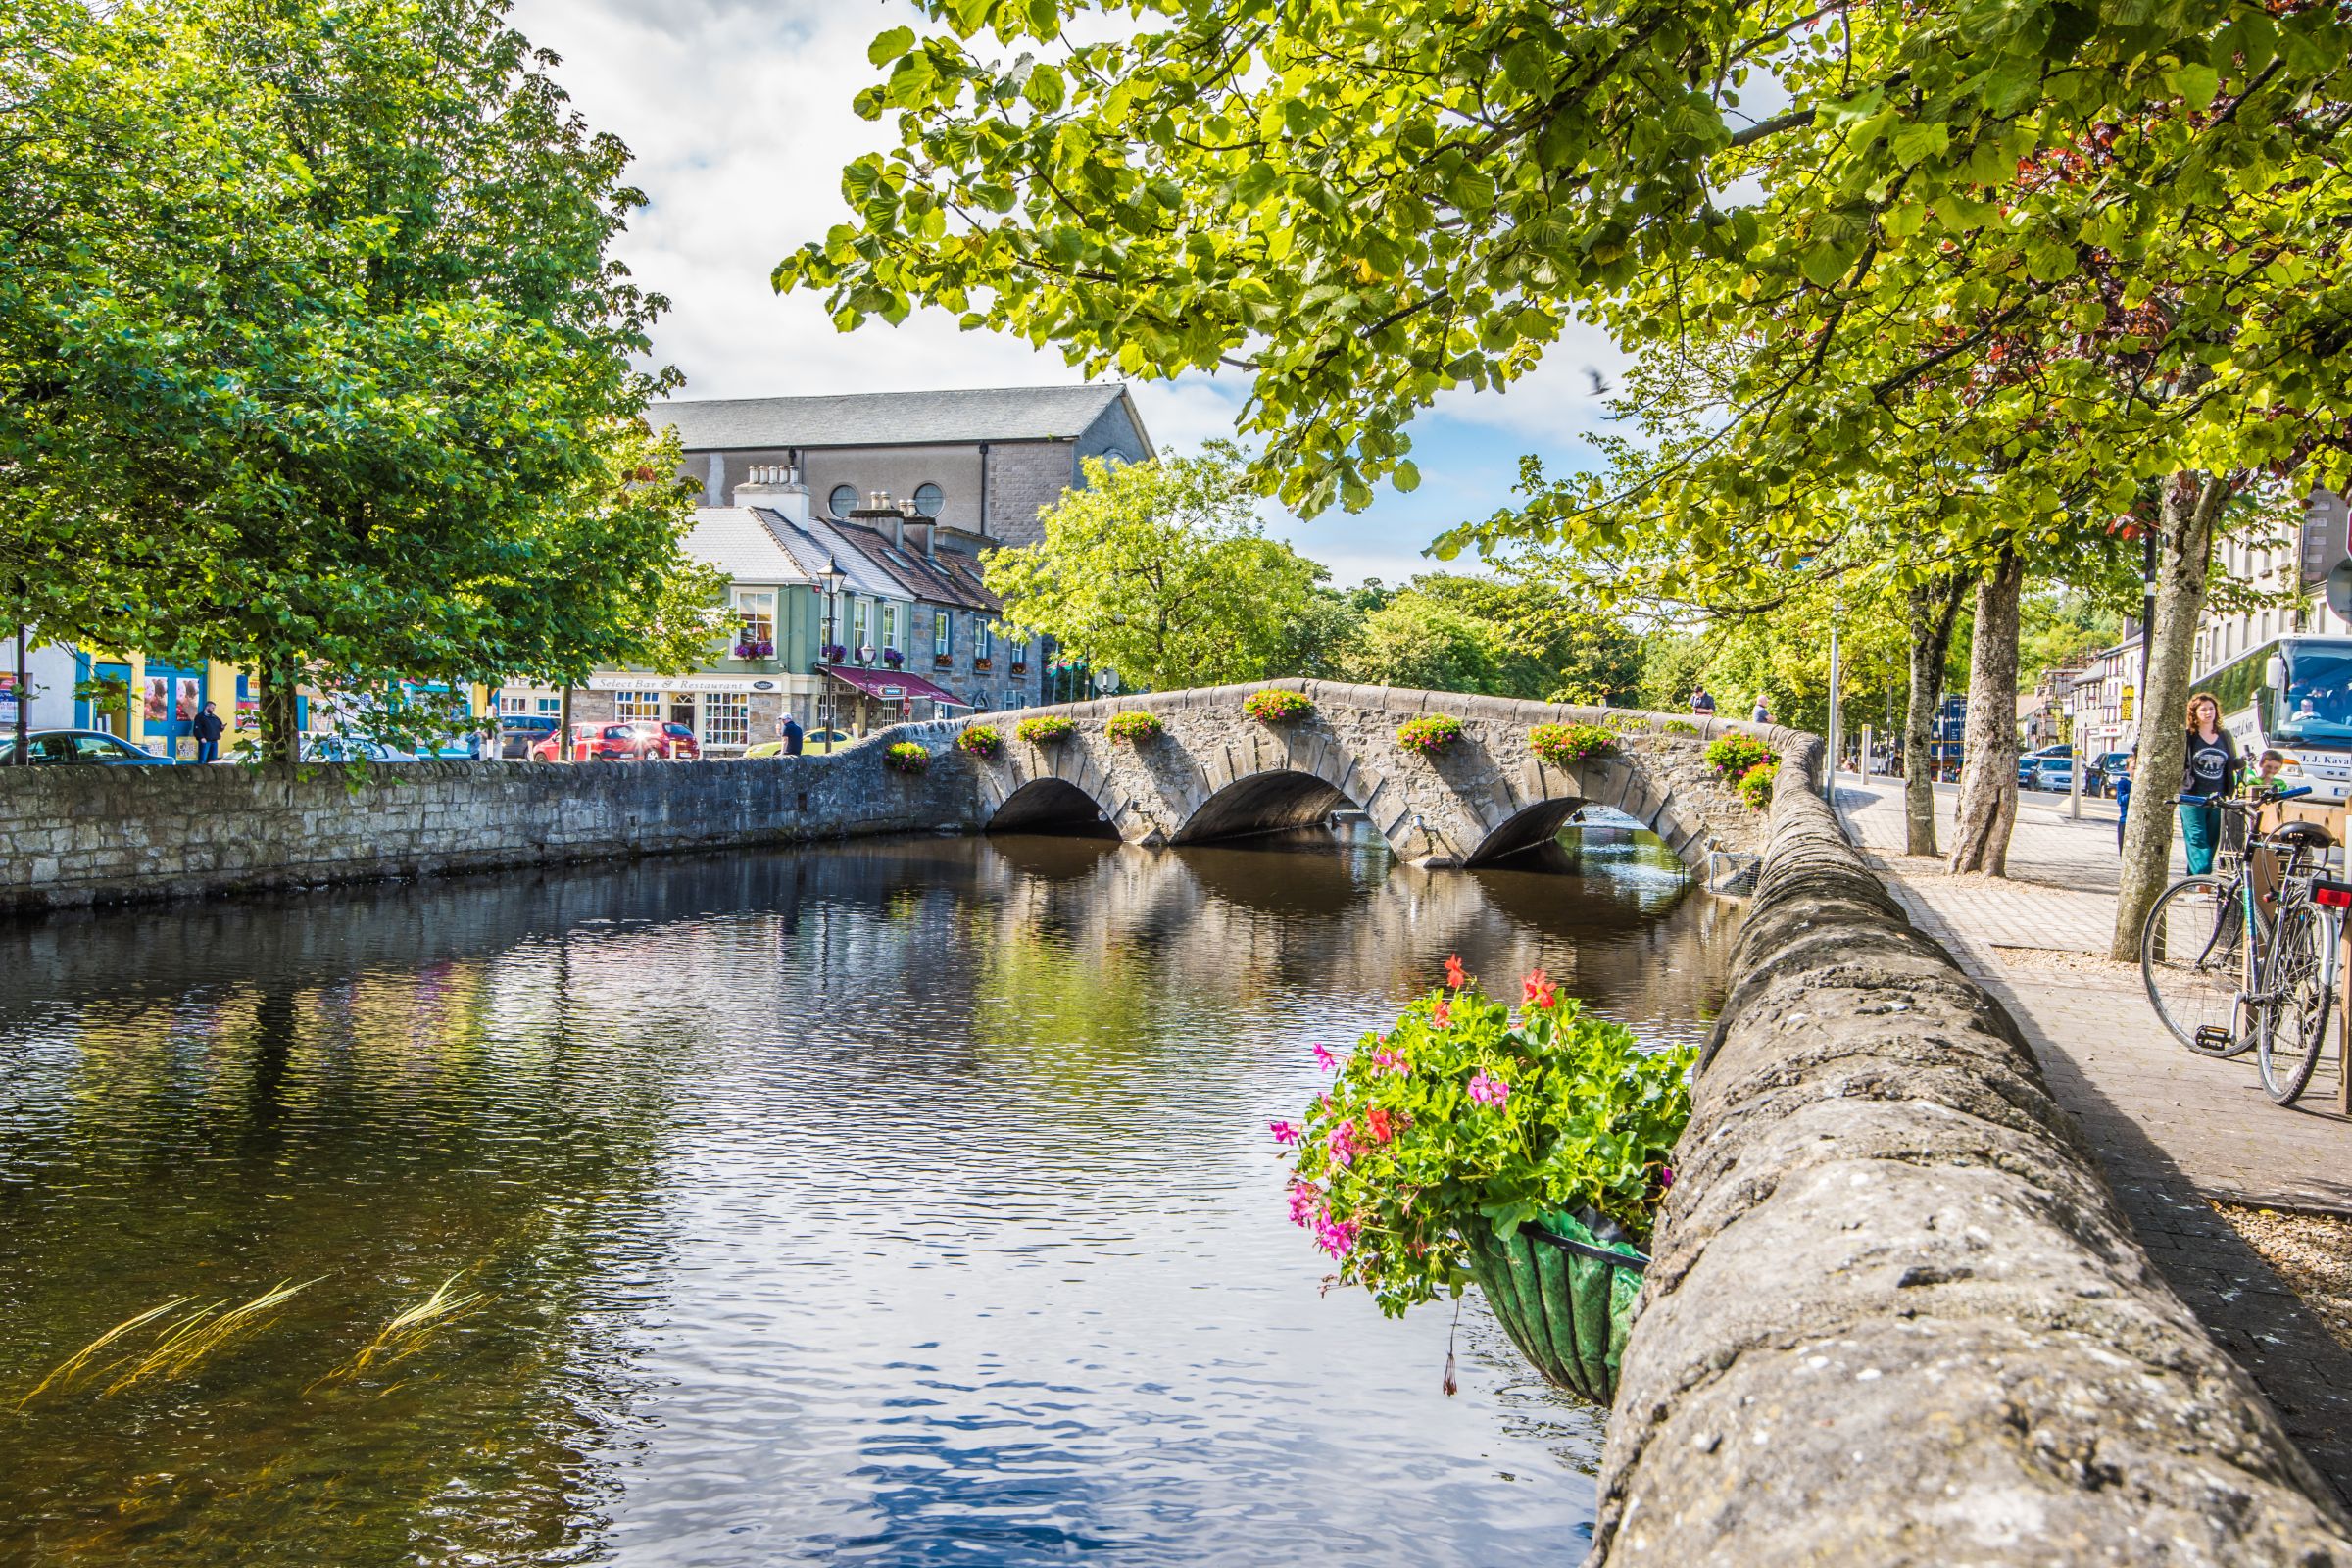 Plan your Trip and Visit Westport with Discover Ireland